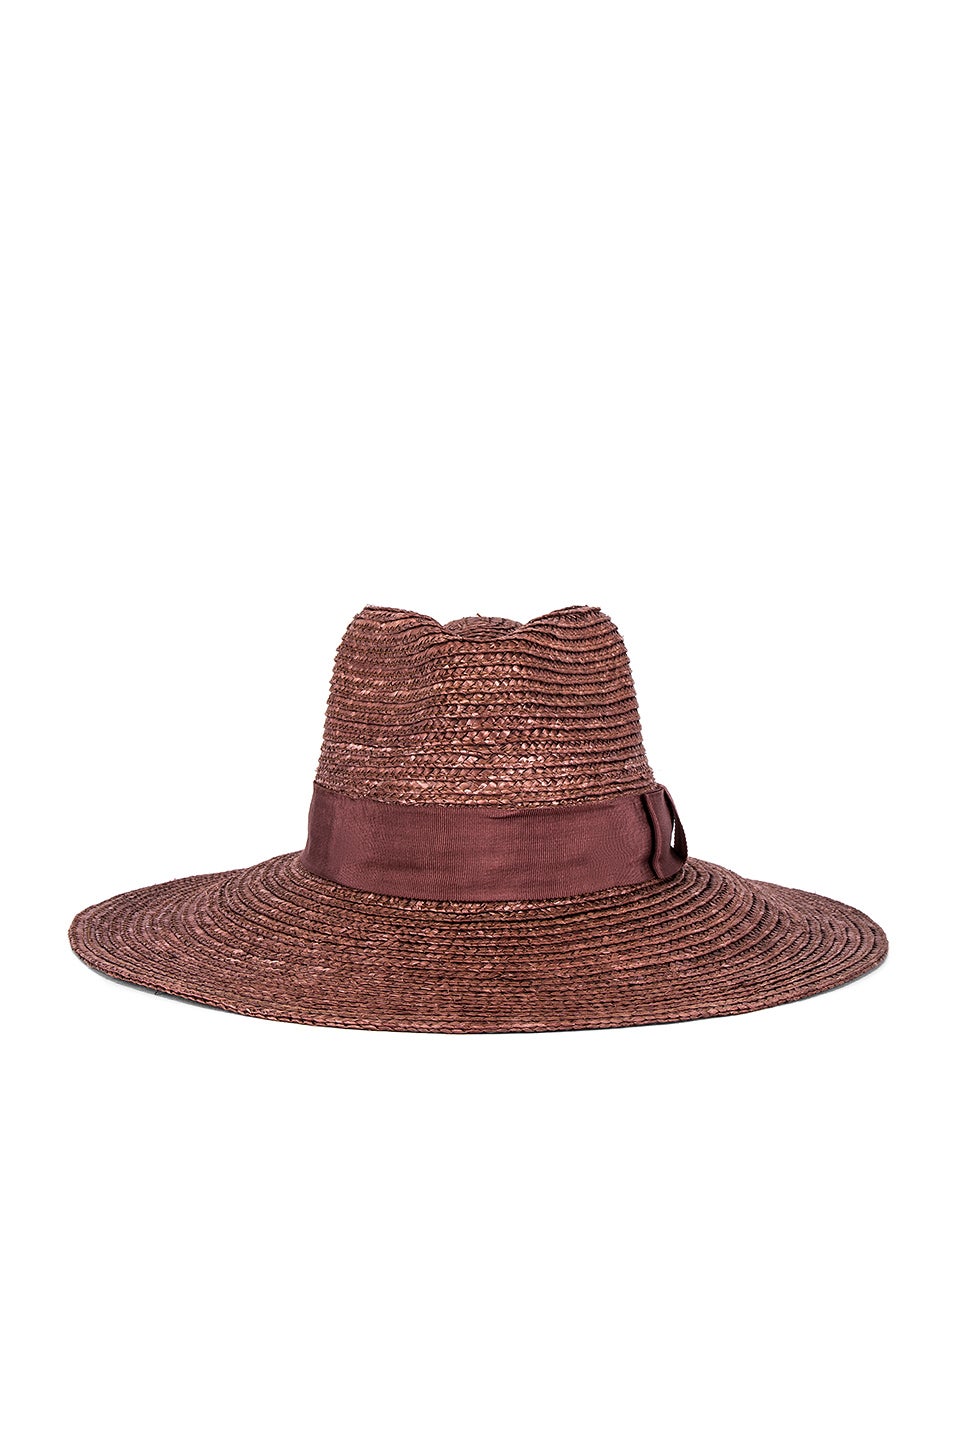 9 Straw Hats Your Church-Going Grandma Would Be Proud Of